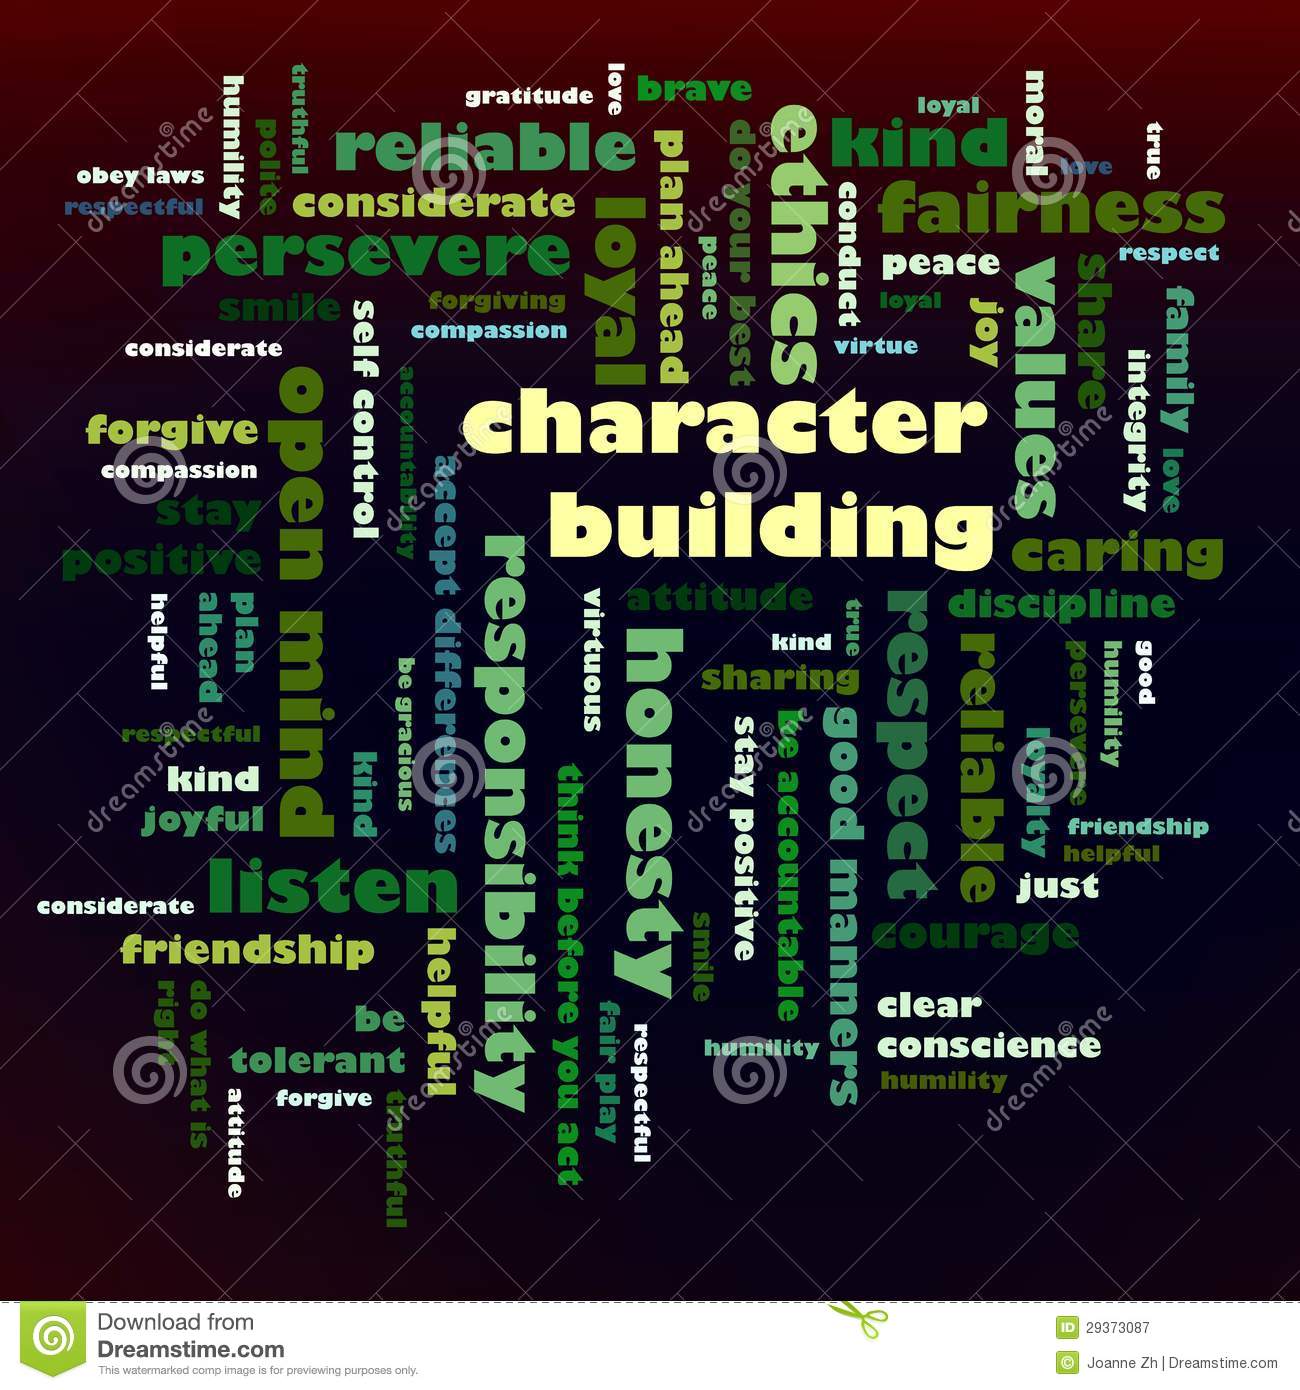 Character Building Word Cloud Royalty Free Stock Photography   Image